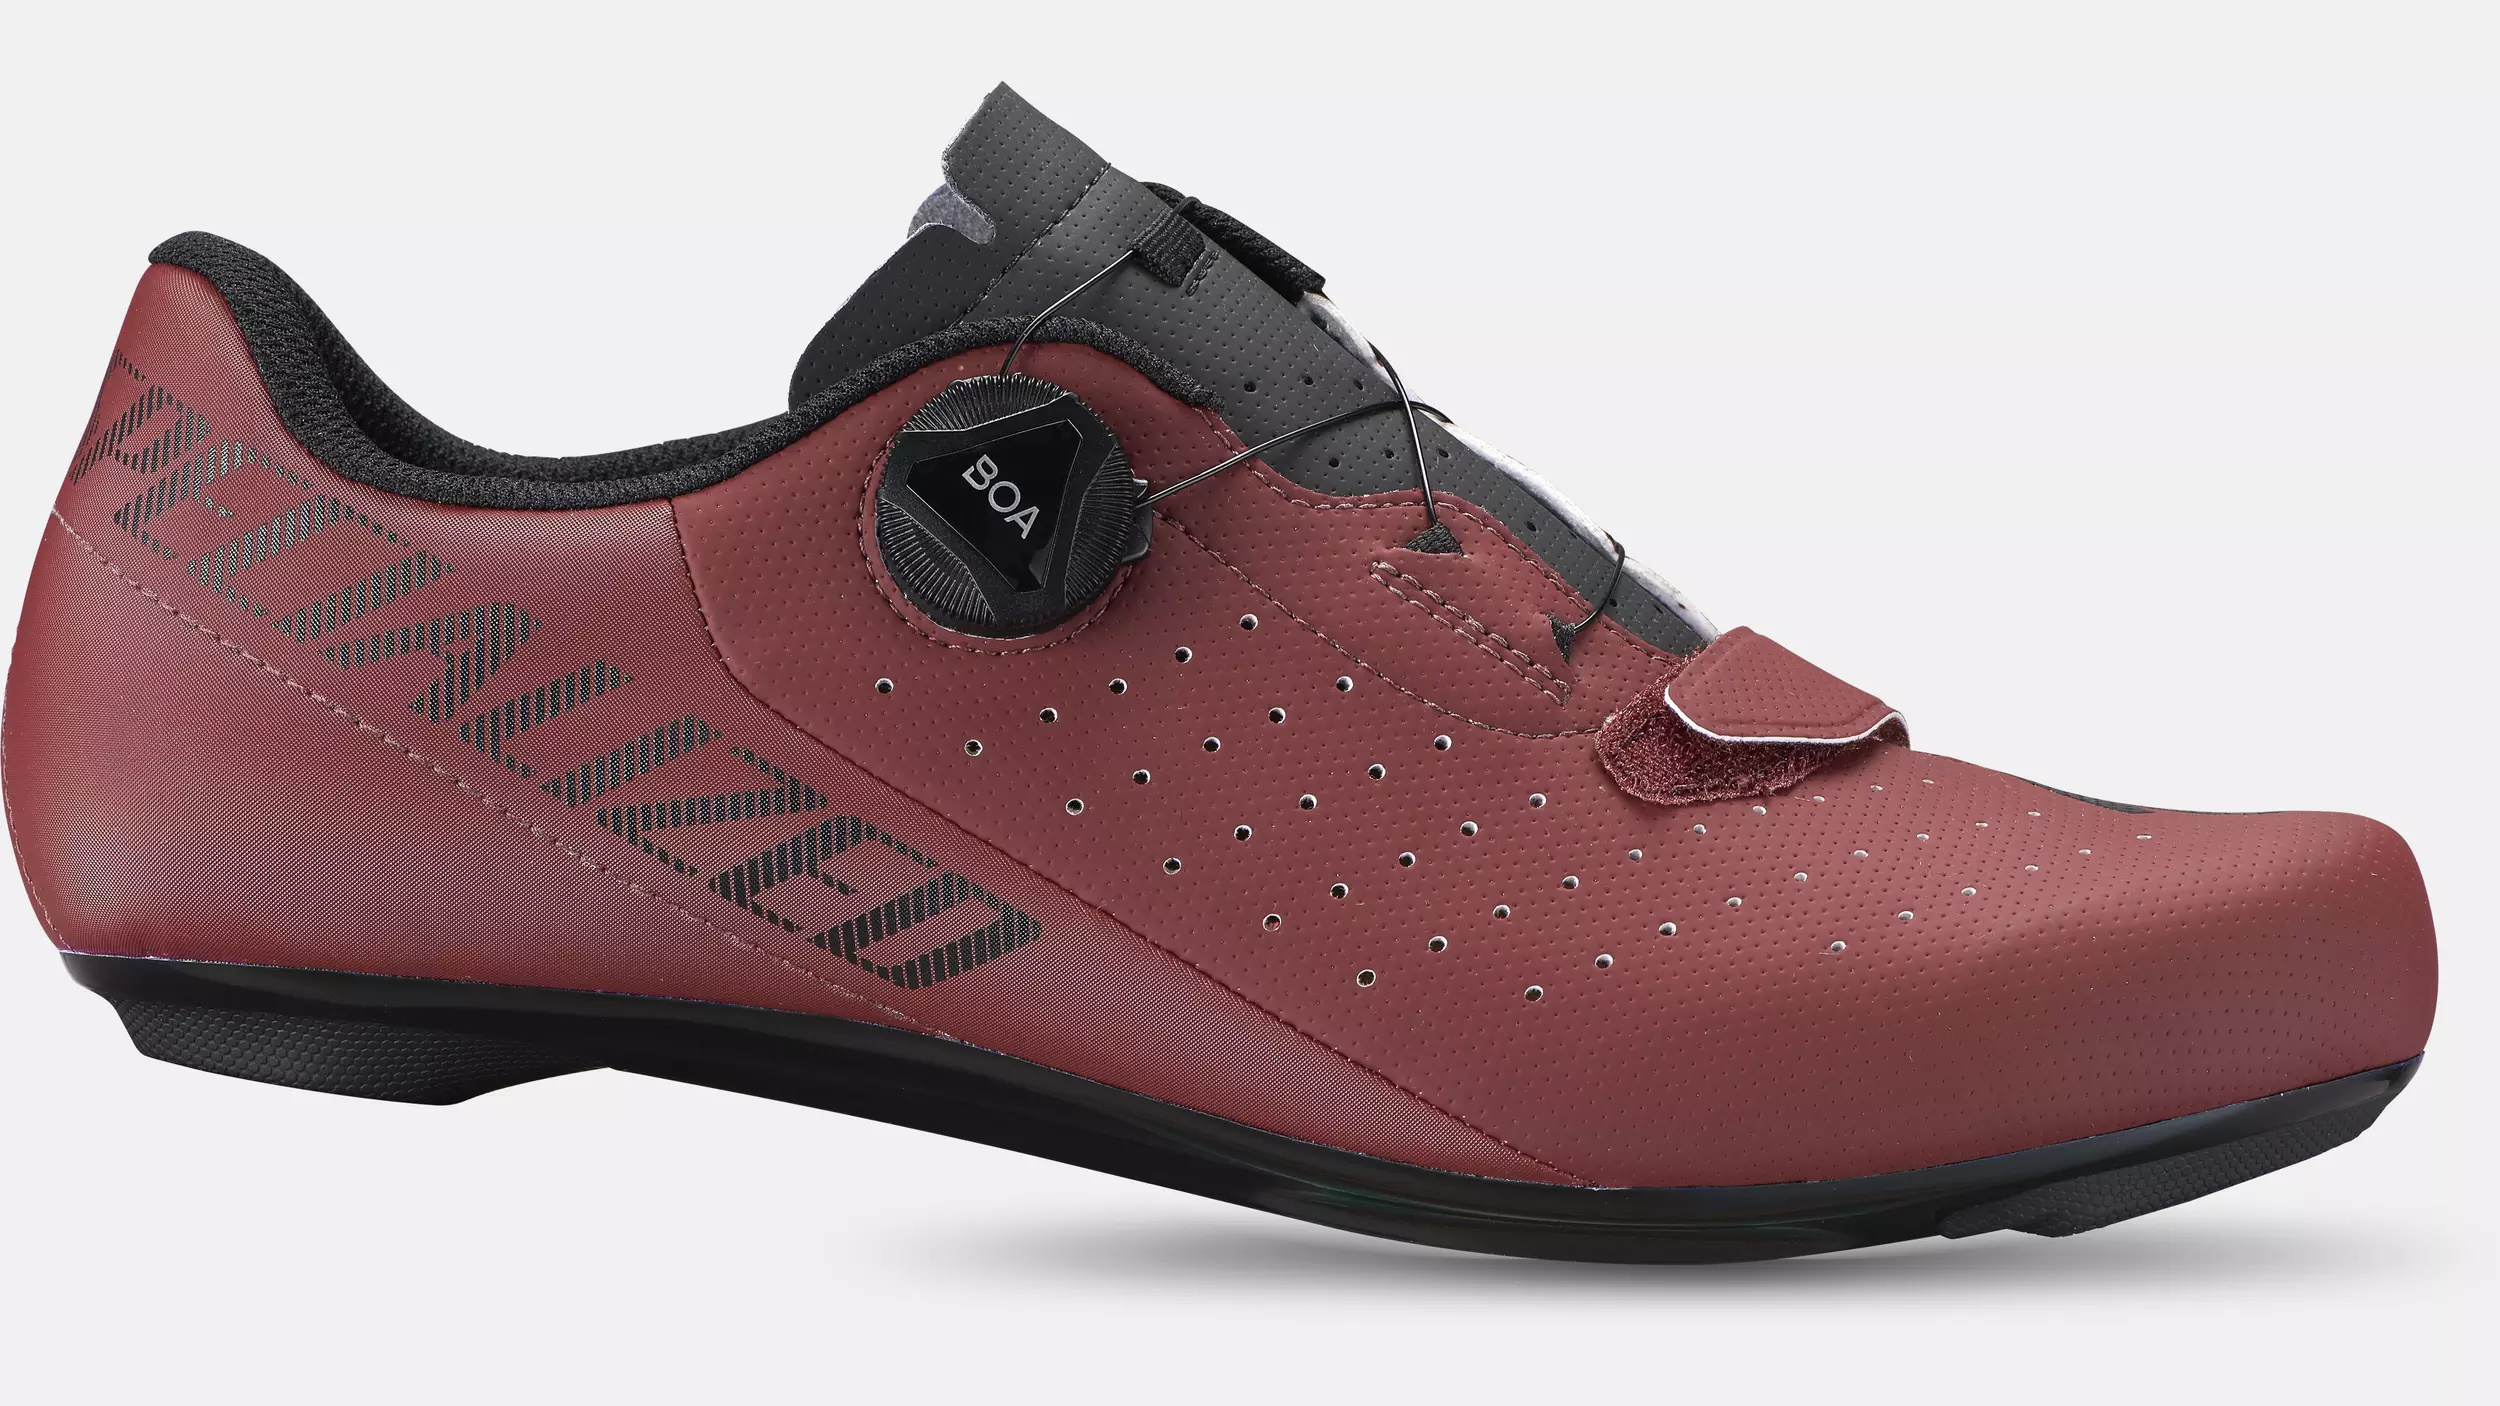 Tretry SPECIALIZED Torch 1.0 Maroon/Black 39